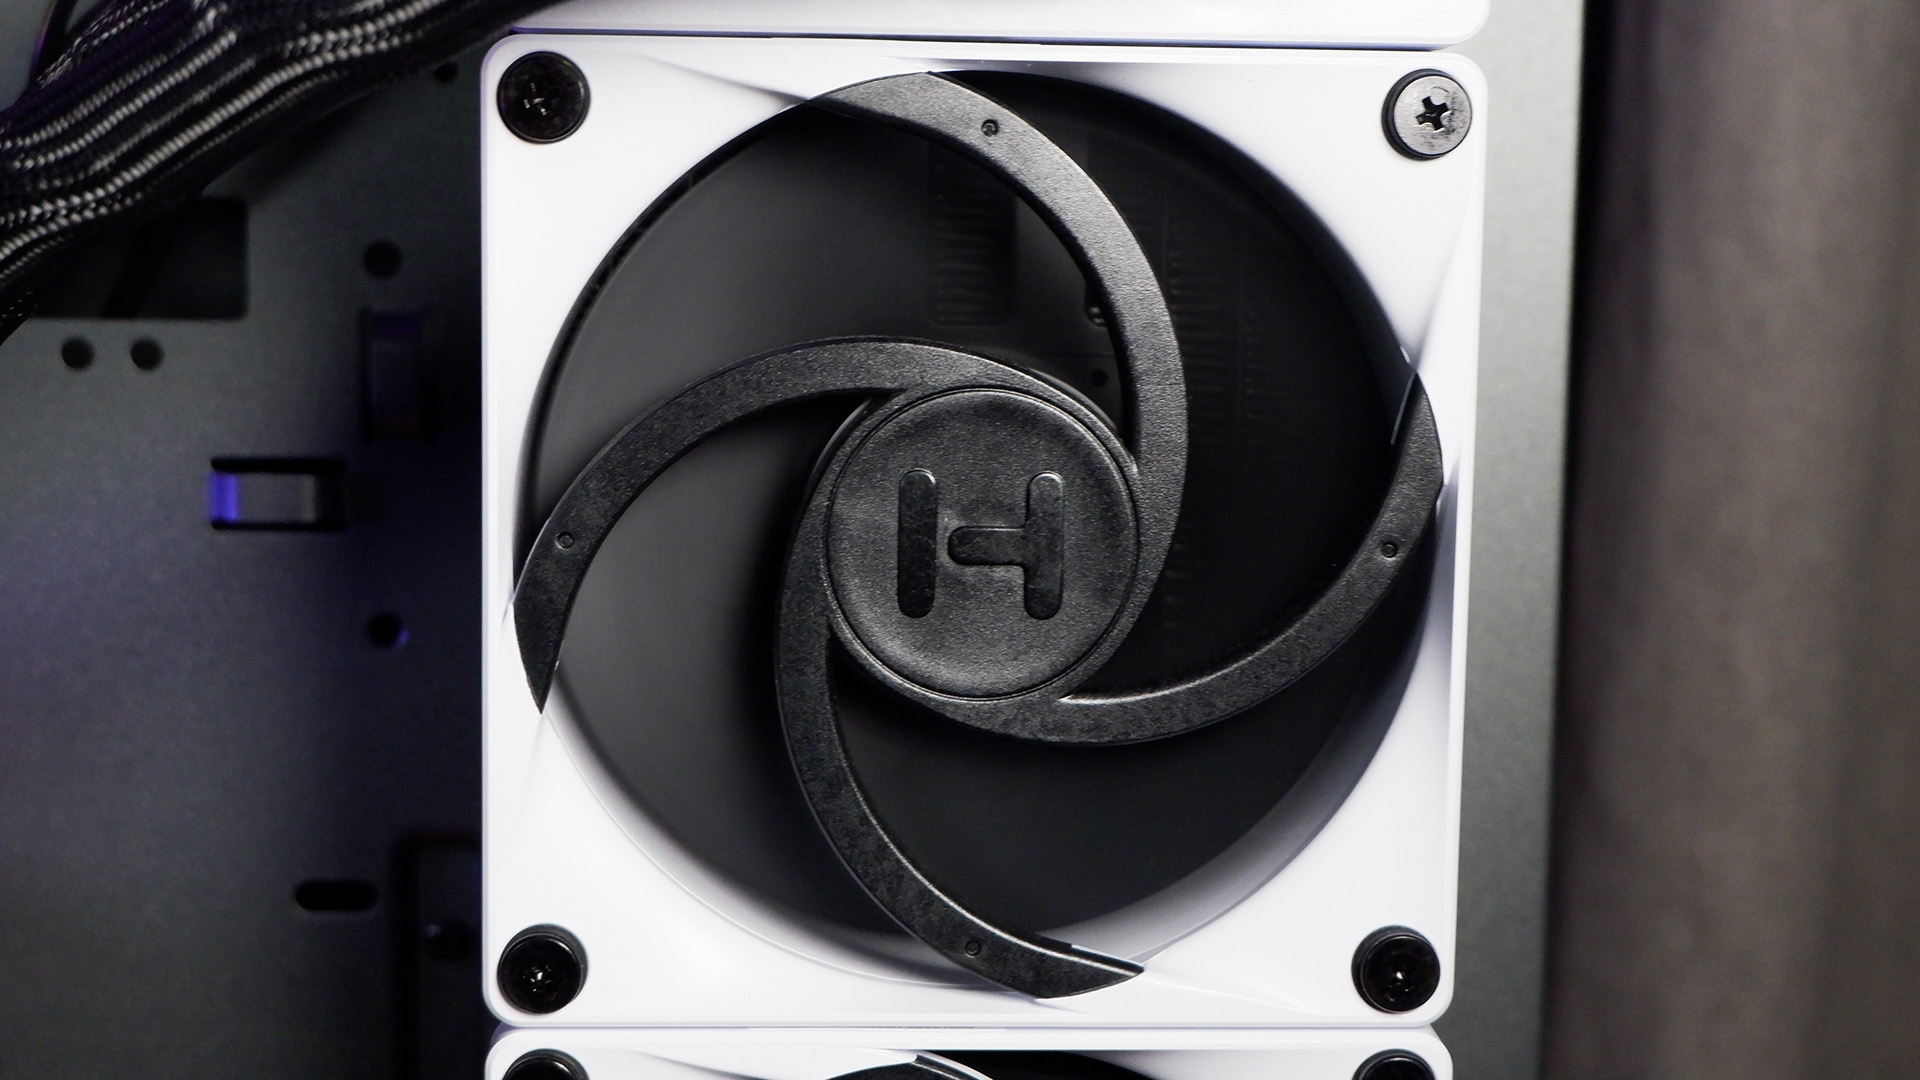 Hyte's Thicc Q60 liquid cooler with a huge 5-inch screen on the cold plate.